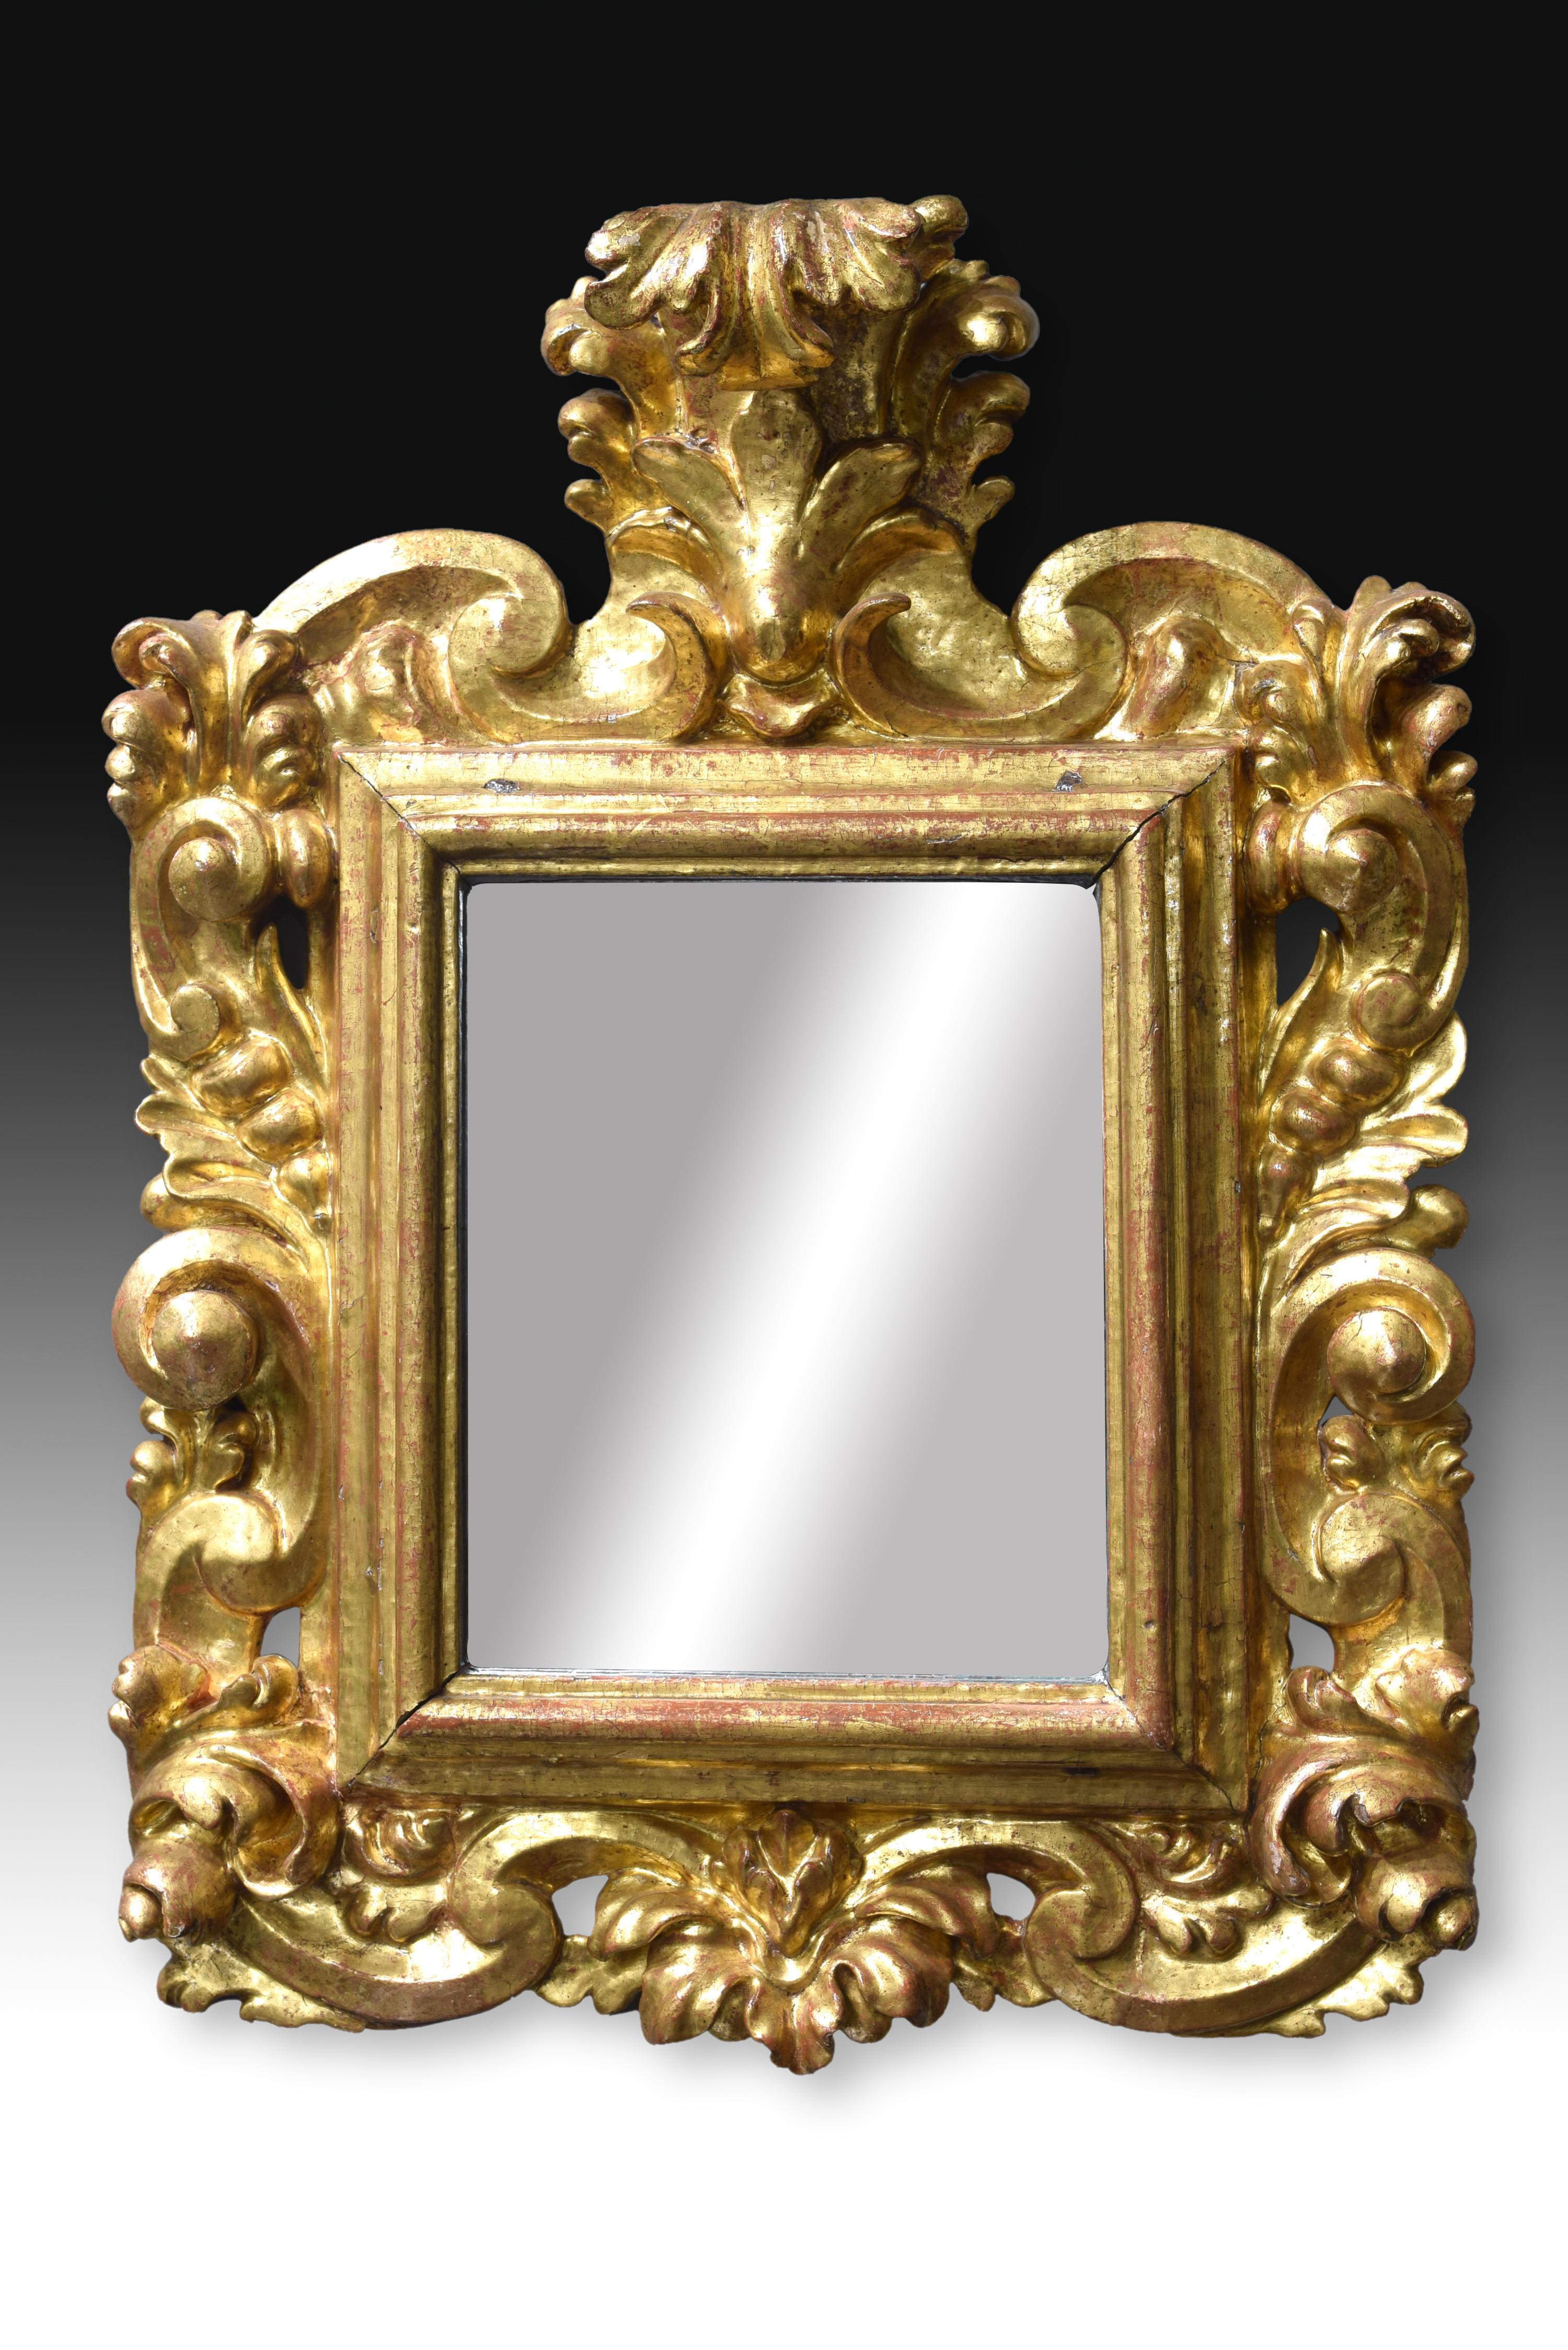 The fleshy decoration of the exterior of this mirror, and its movement, places this artpiece in the Baroque, but both the harmony and the symmetry and the fact that the decoration does not just protrude from the rectangular frame (except for the